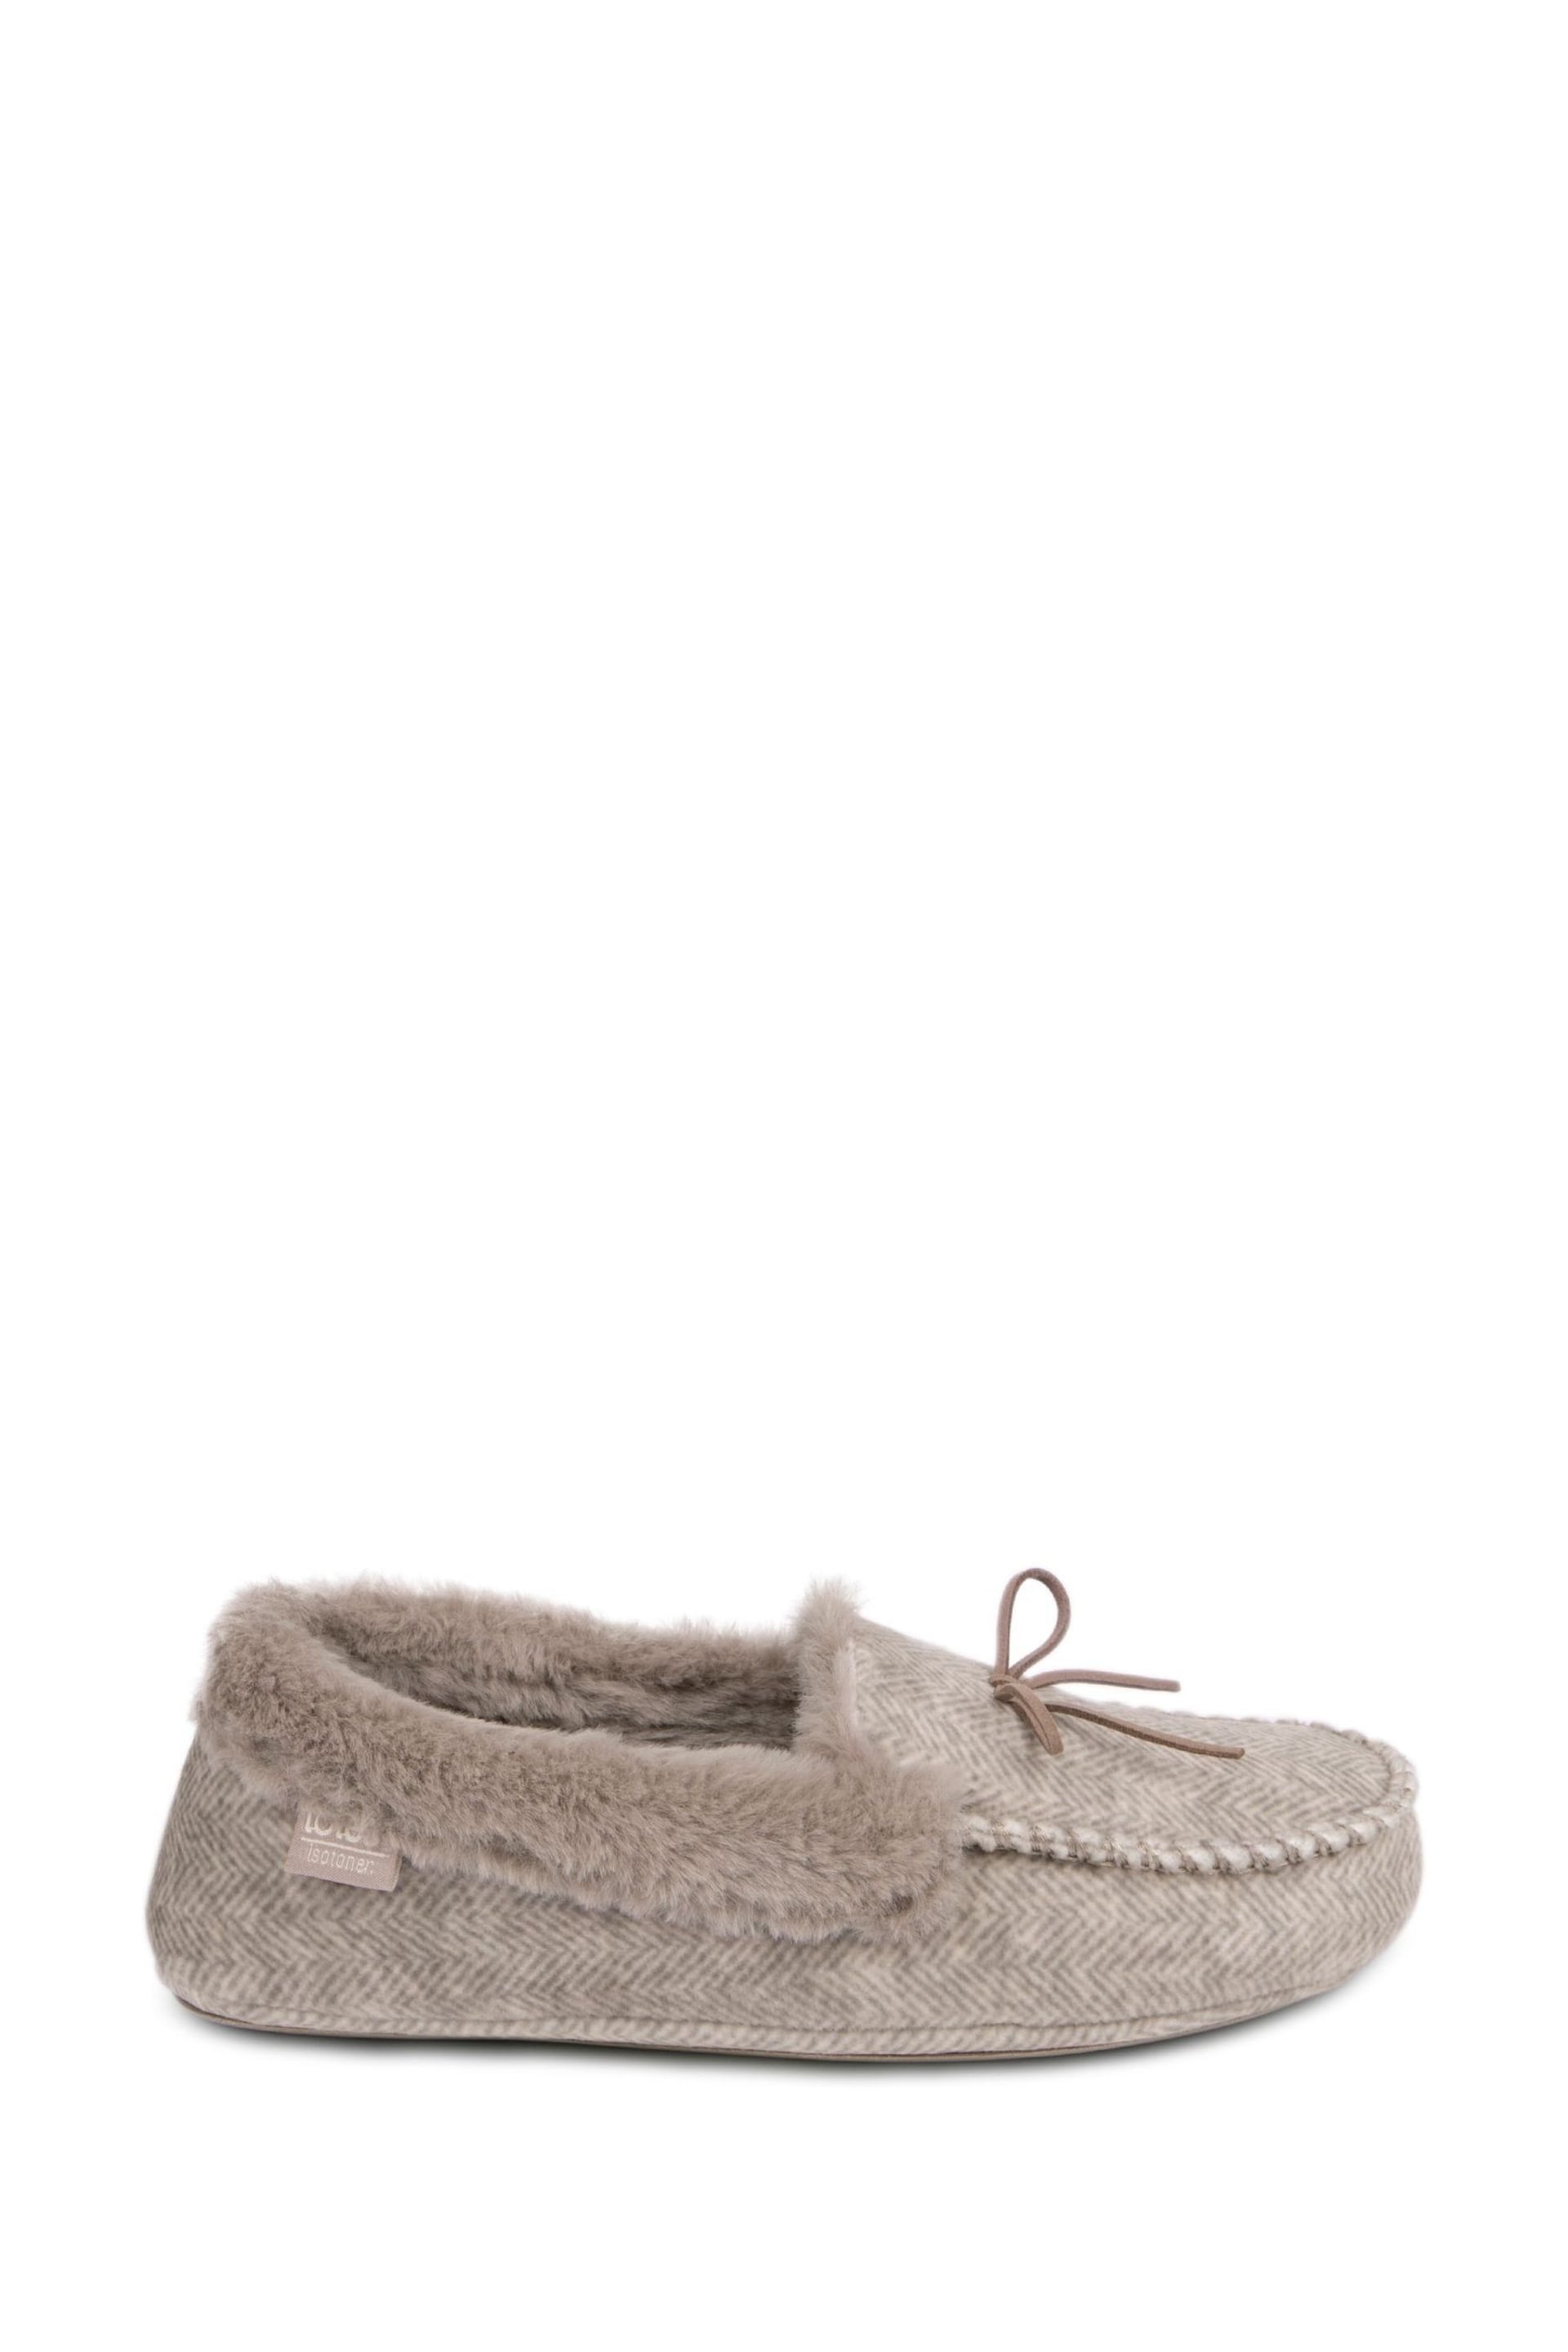 Totes Pink Ladies Herringbone Velour Moccasin With Faux Fur Cuff & Bow Detail - Image 2 of 5